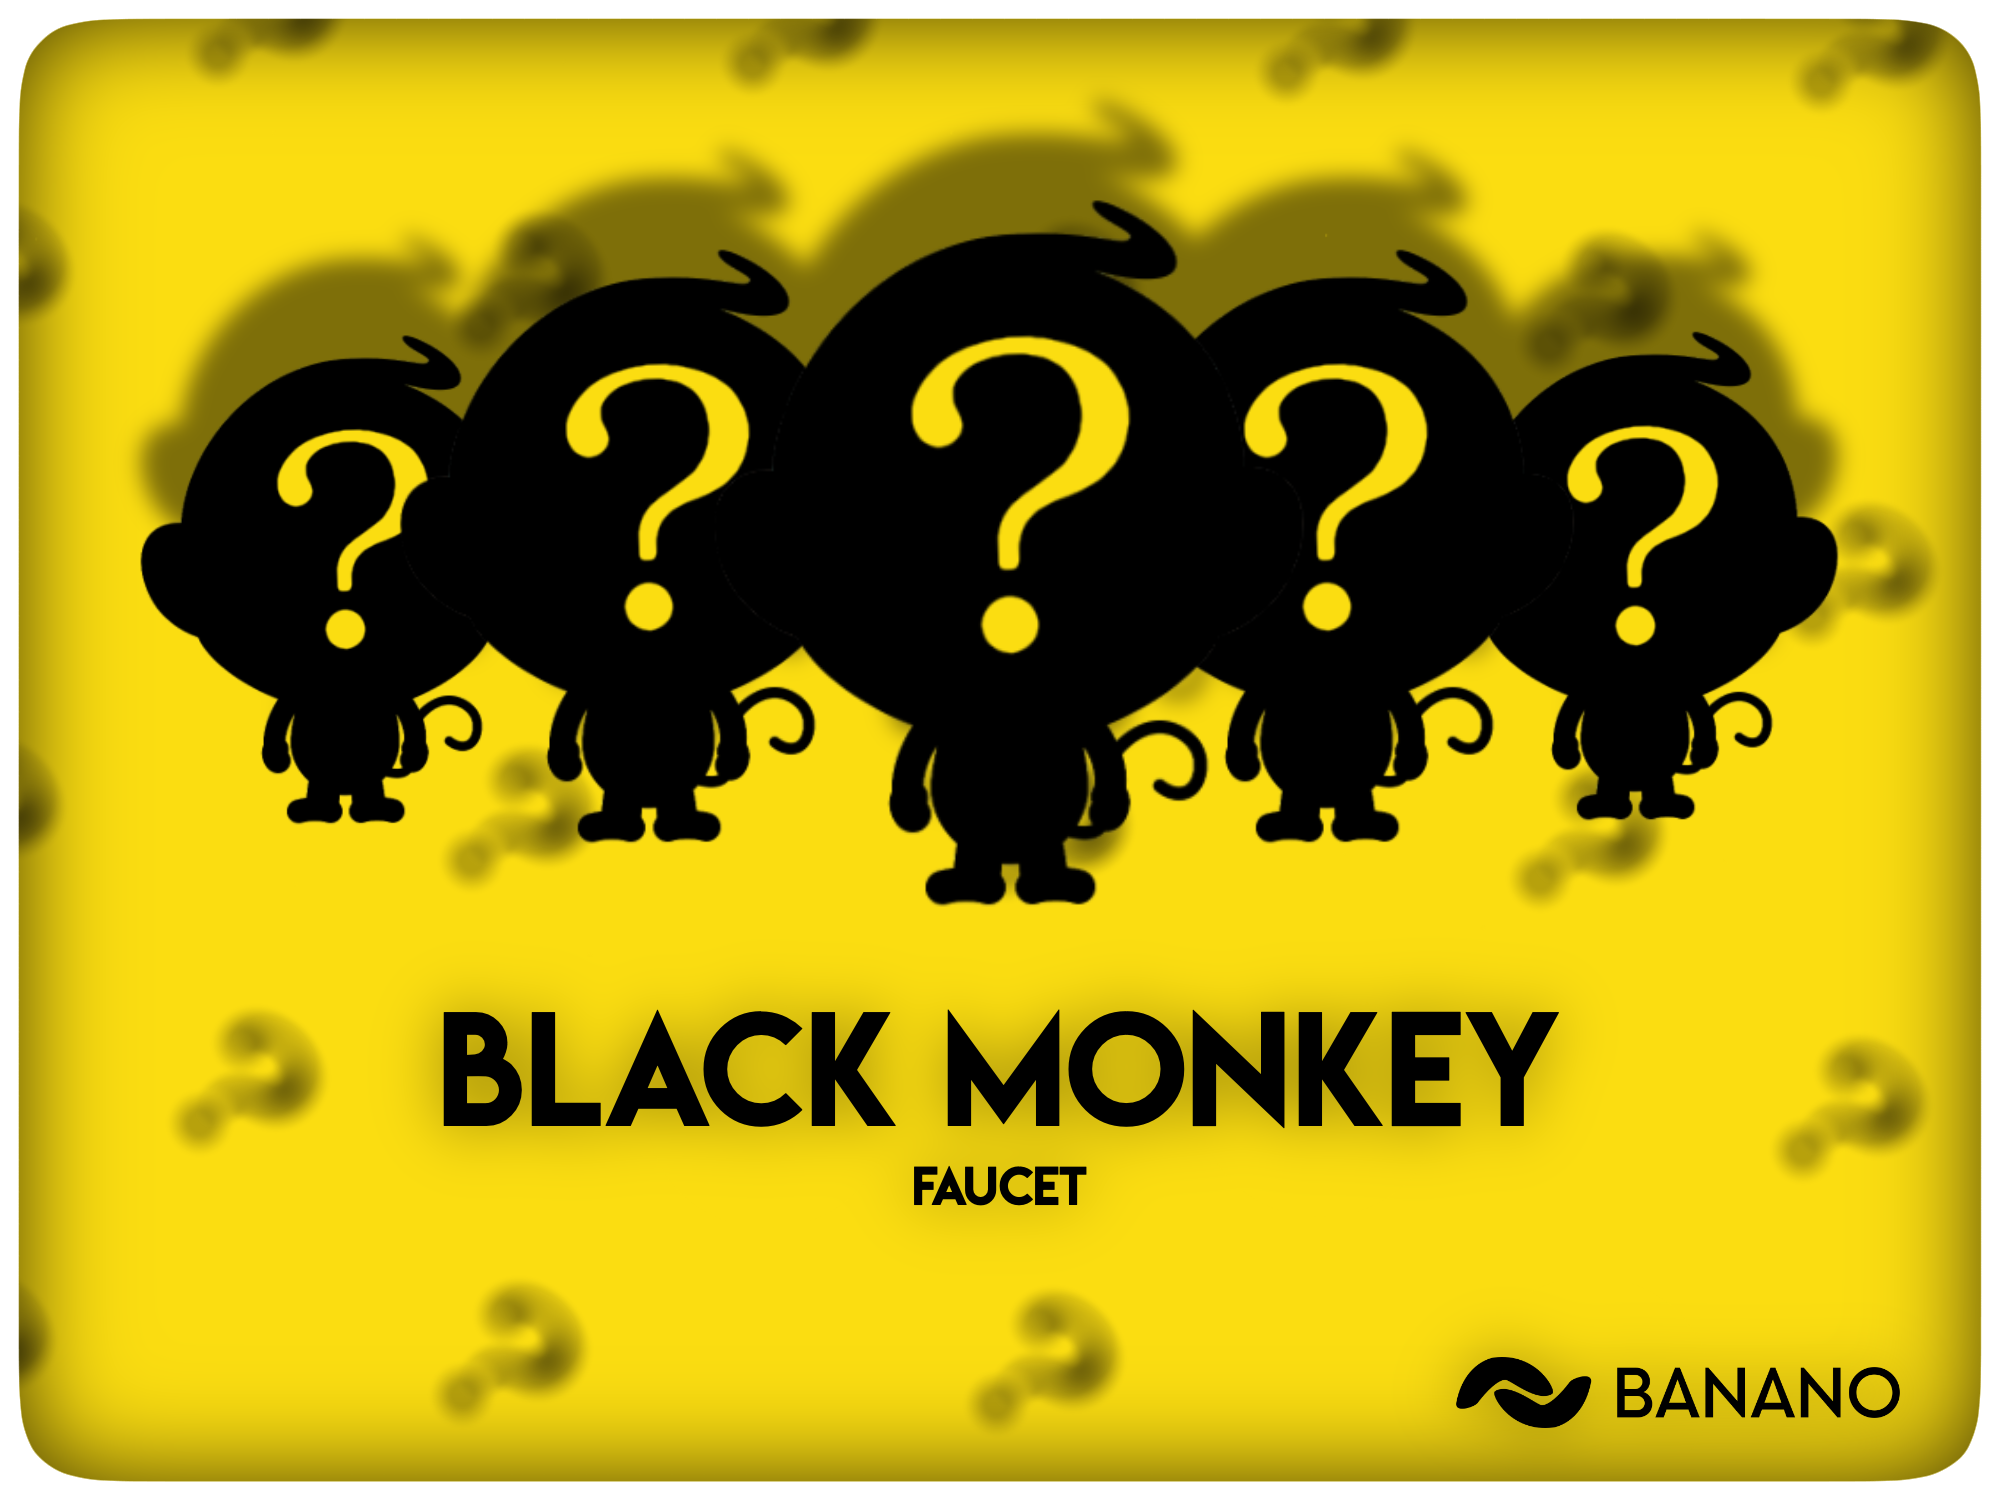 BANANO Faucet Game ‘Black Monkey’ Round 23 is Online — 24 Hours Only!